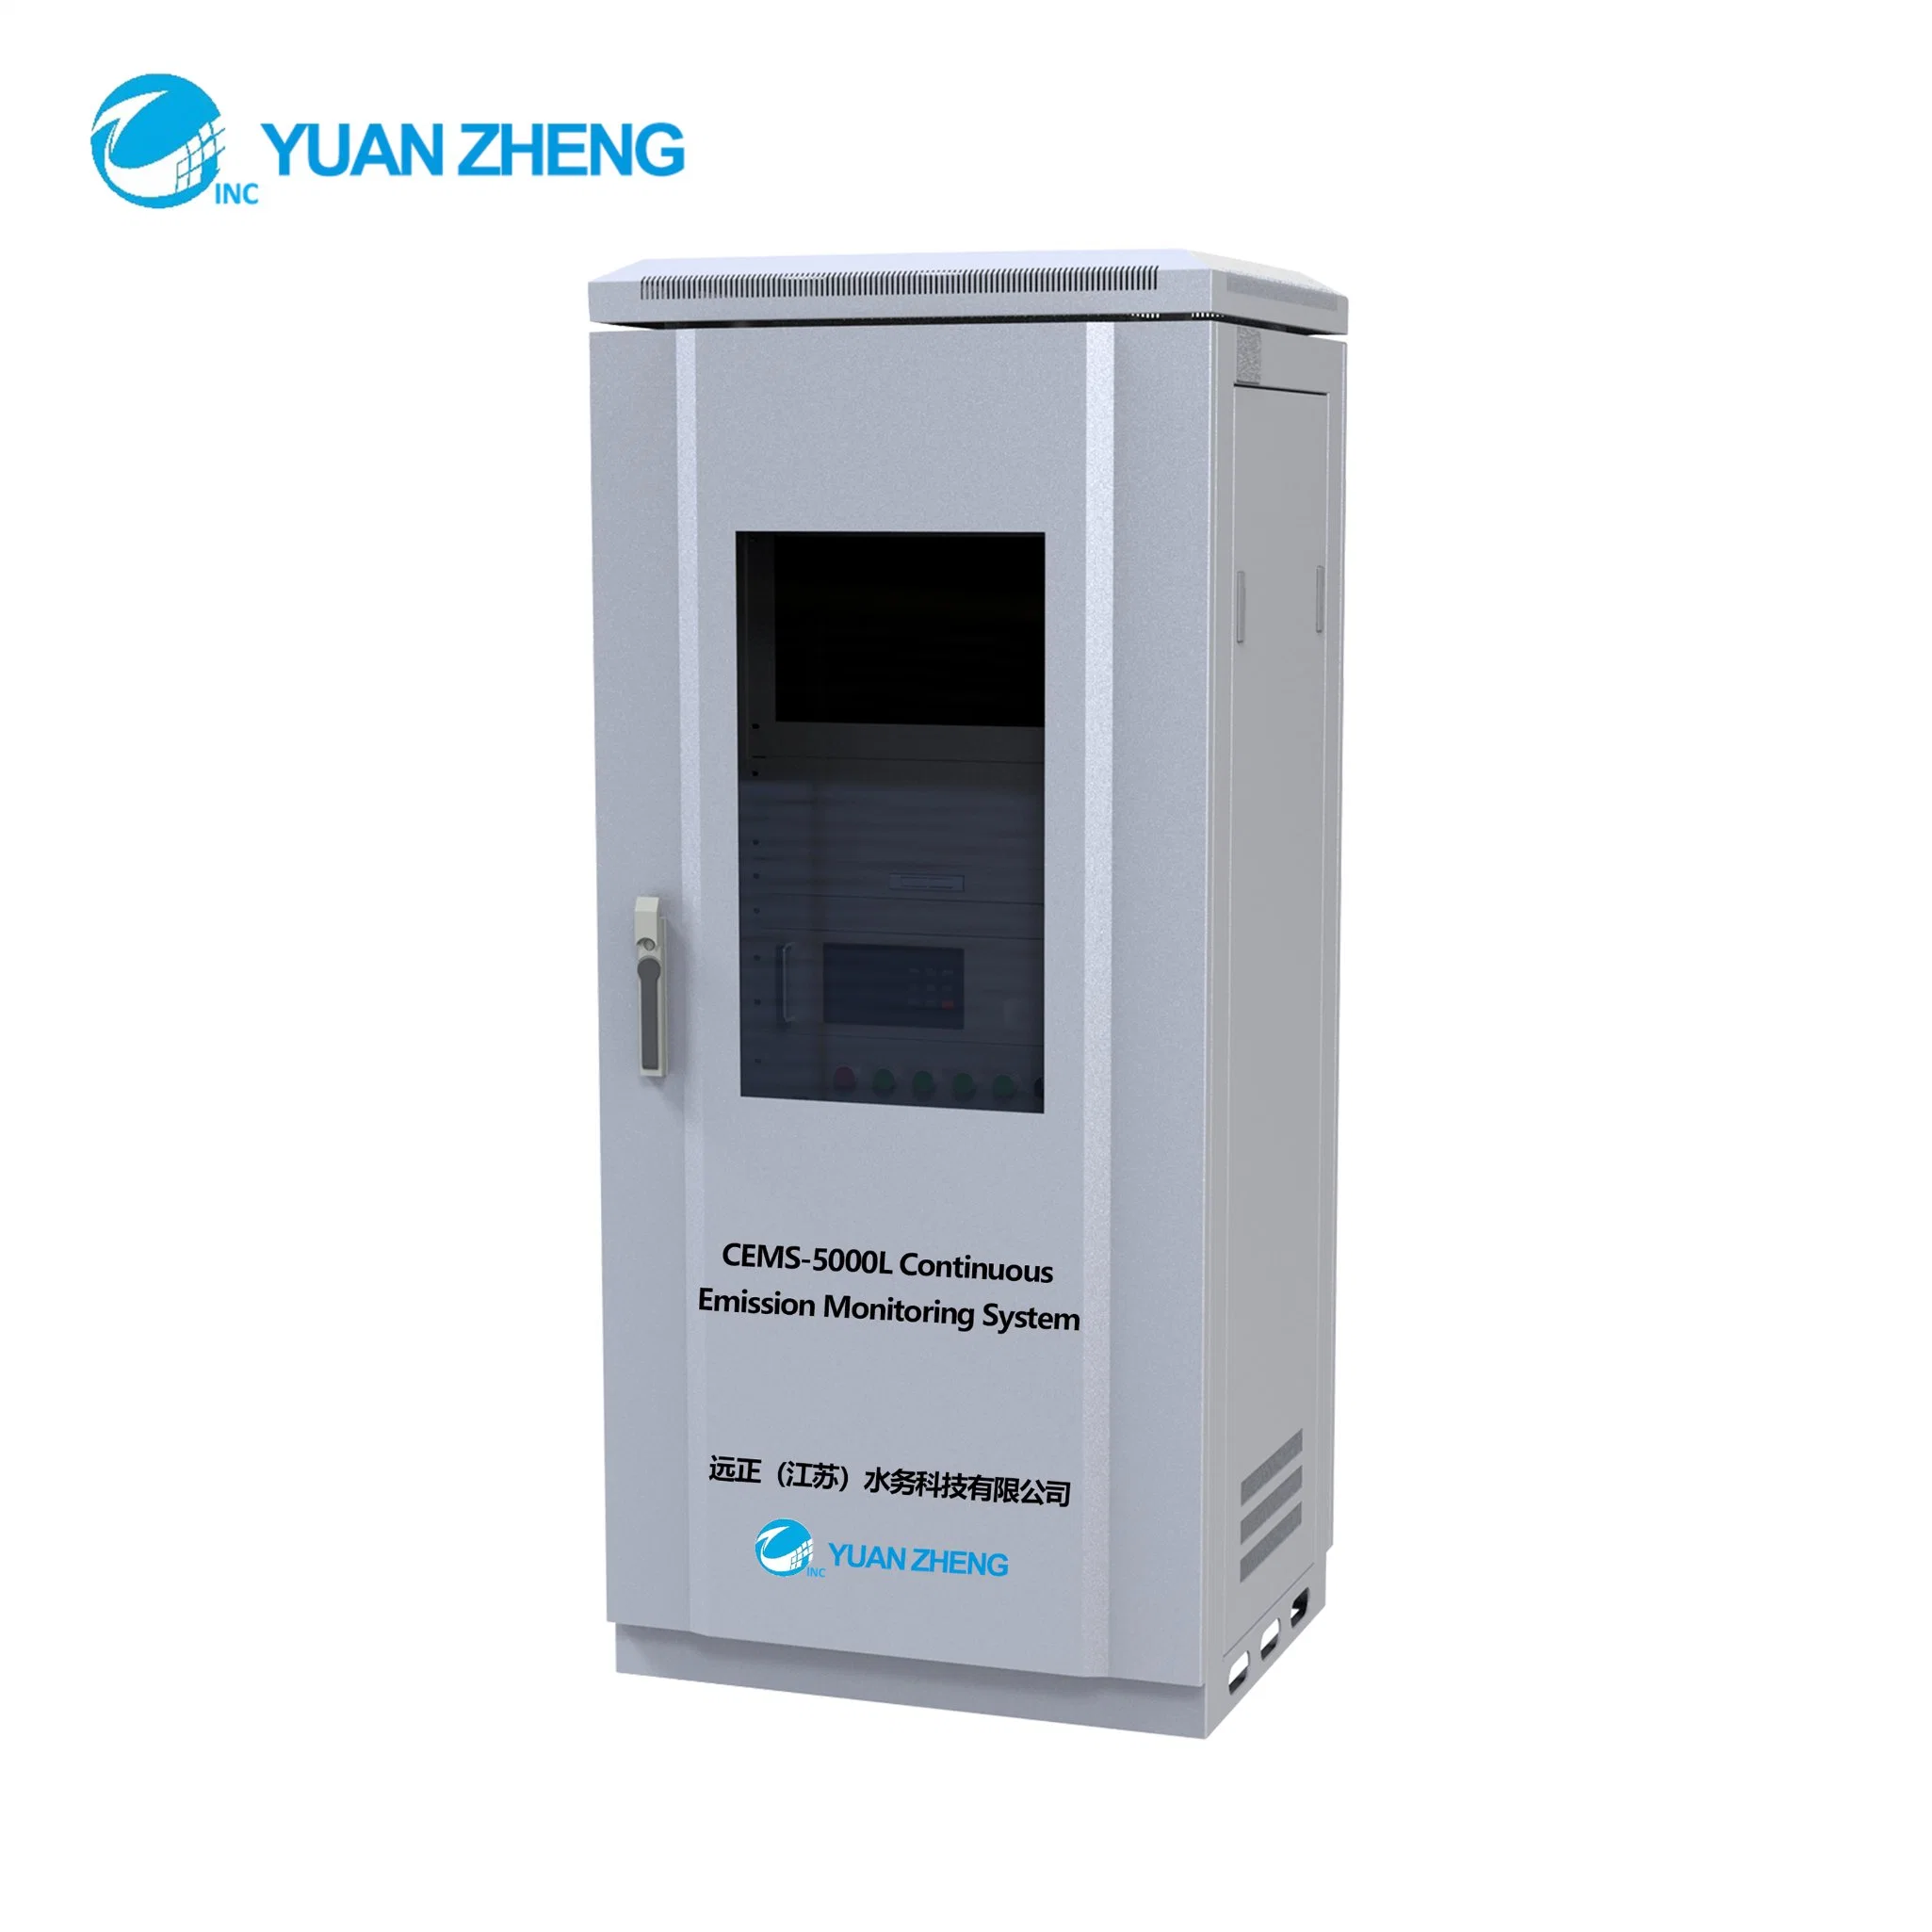 High Accuracy UV Analyzer for So2, Nox (NO, NO2) , Co, CO2 Online Monitoring, Ultra-Low Emission Limit, Customizable